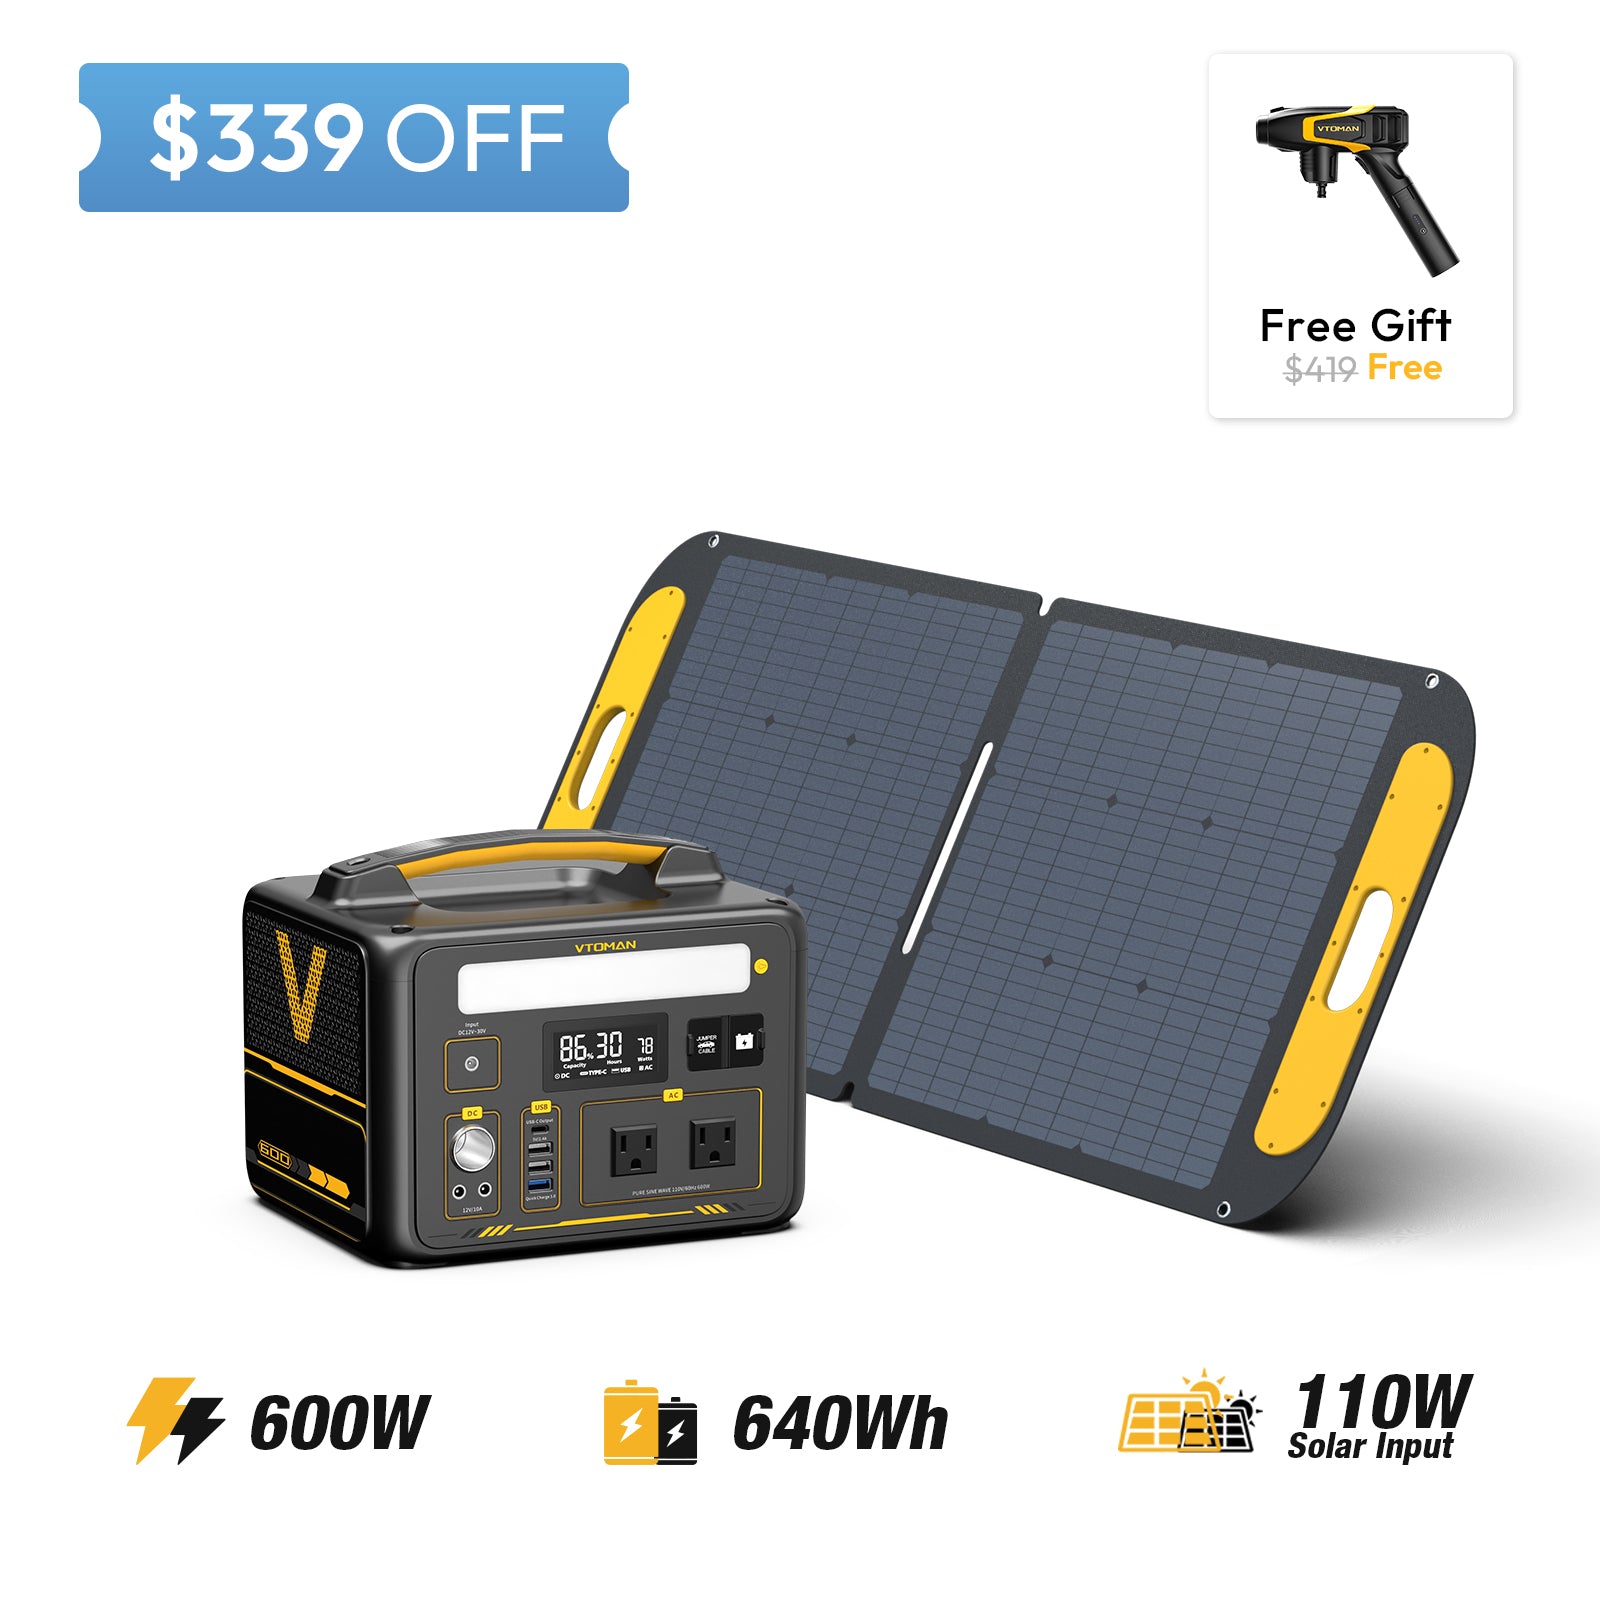 Jump 600 and 110w solar panel save $339 in summer sale